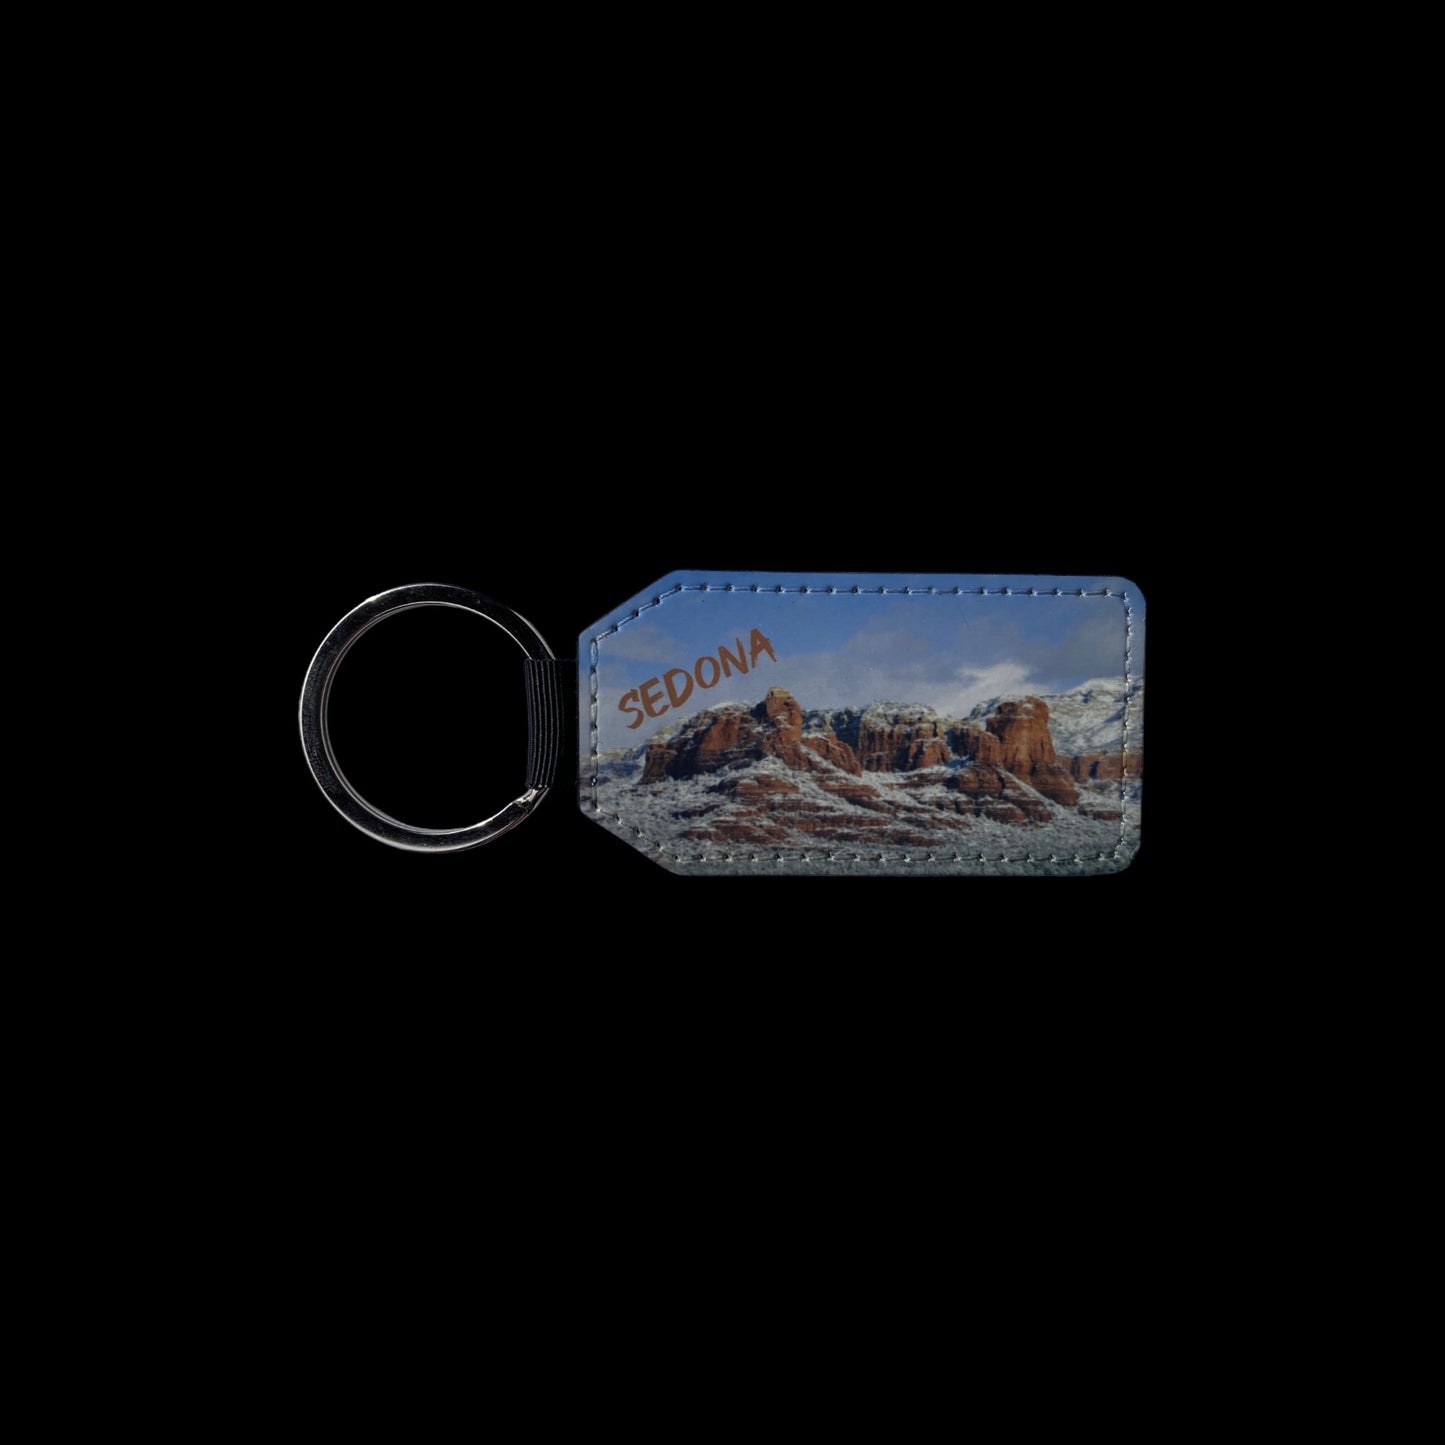 Keychain with Sweeping views of Sedonas Majestic Red Rocks covered in snow